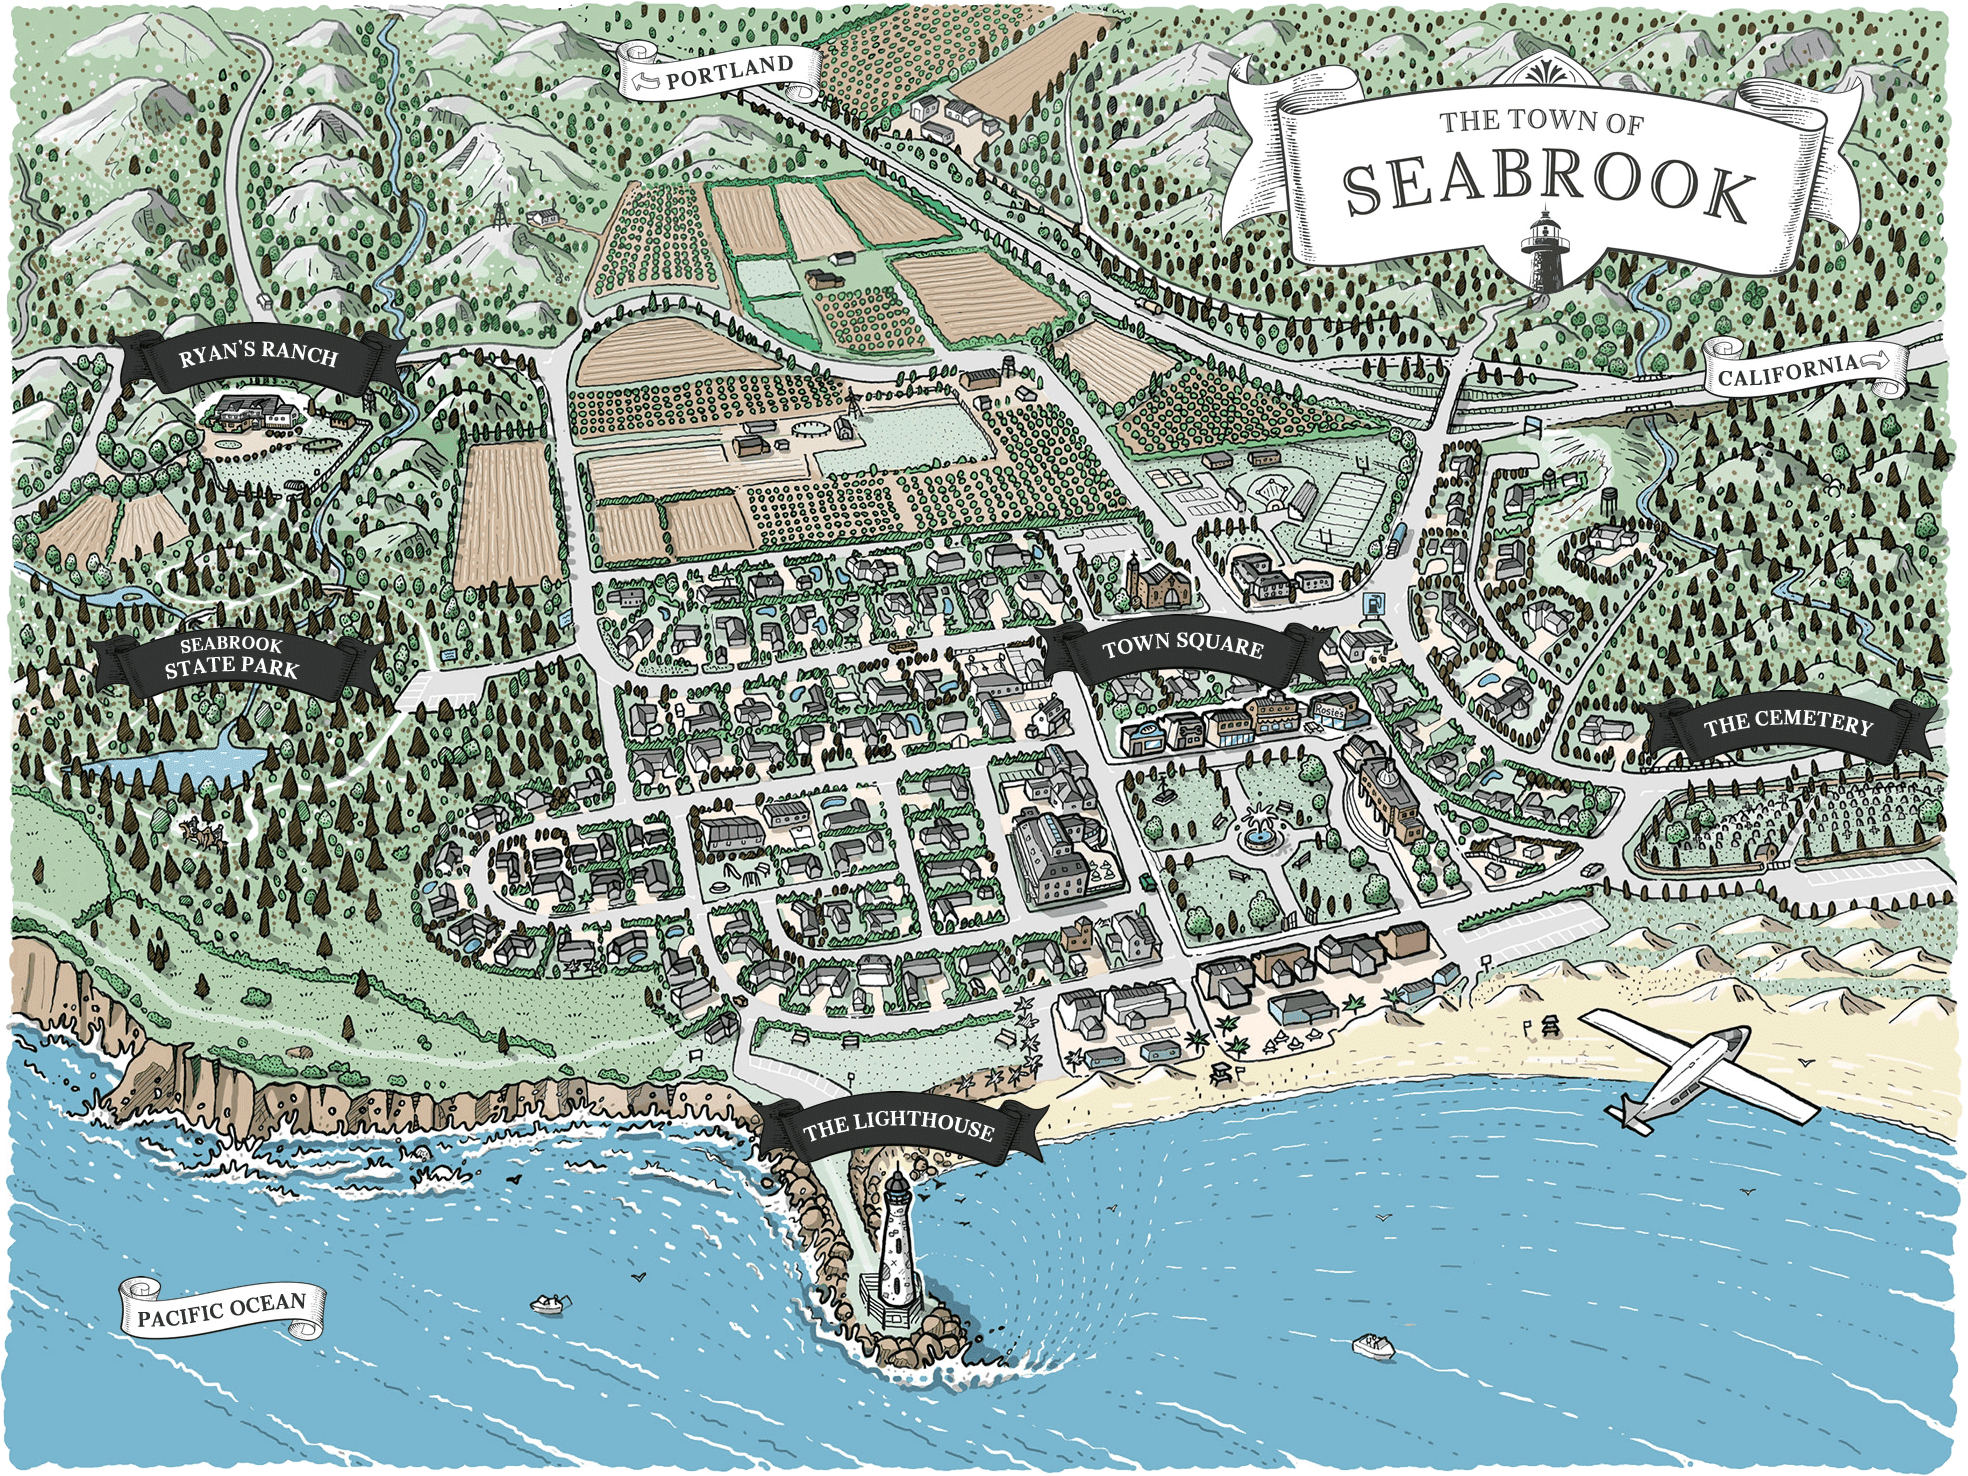 Map of Seabrook